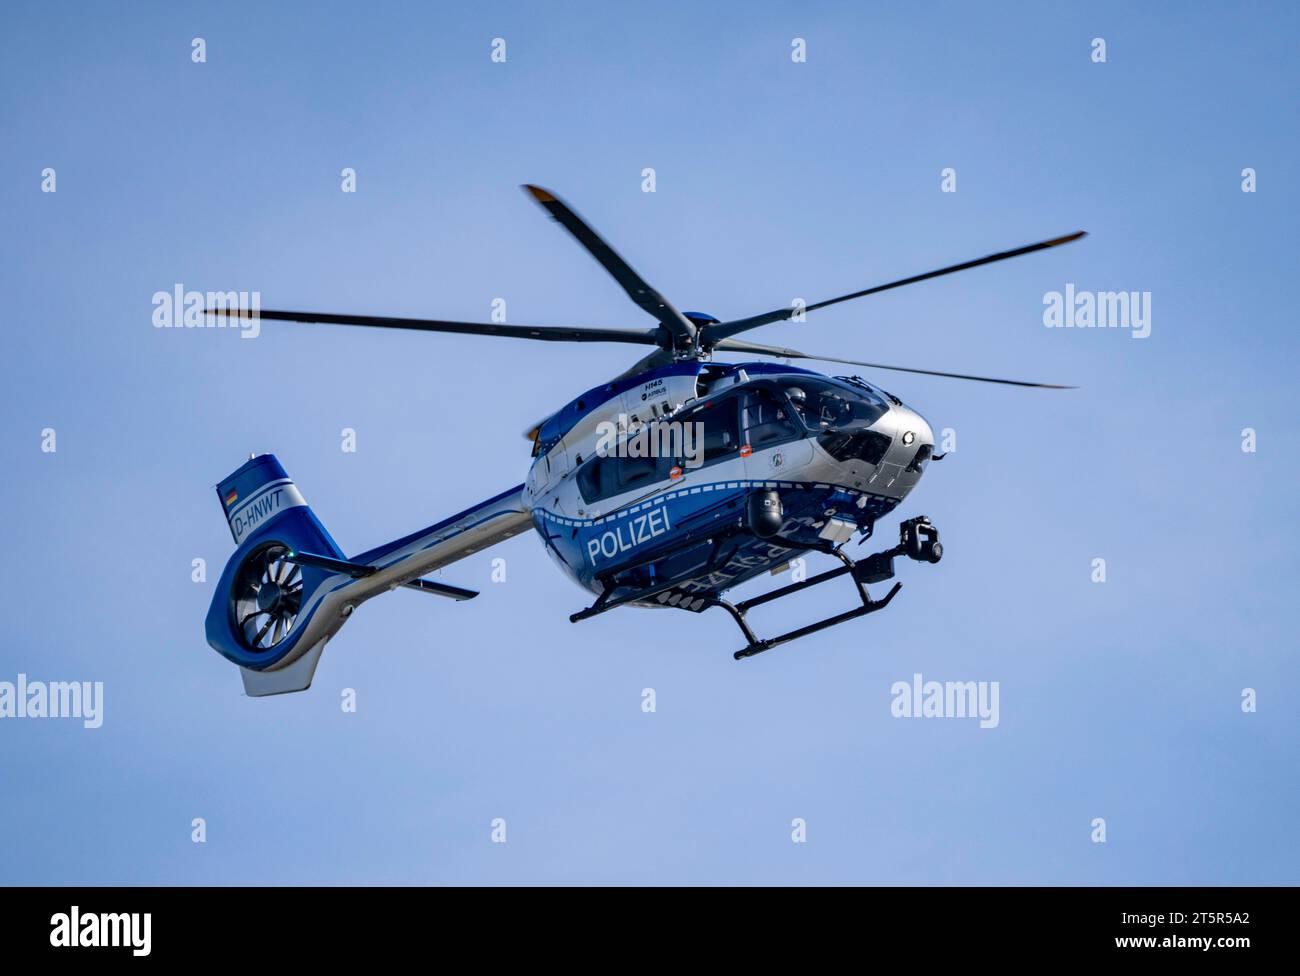 Police helicopter, Airbus Helicopters H145, of the NRW state police, after take-off at Düsseldorf Airport, police aviation squadron, Stock Photo